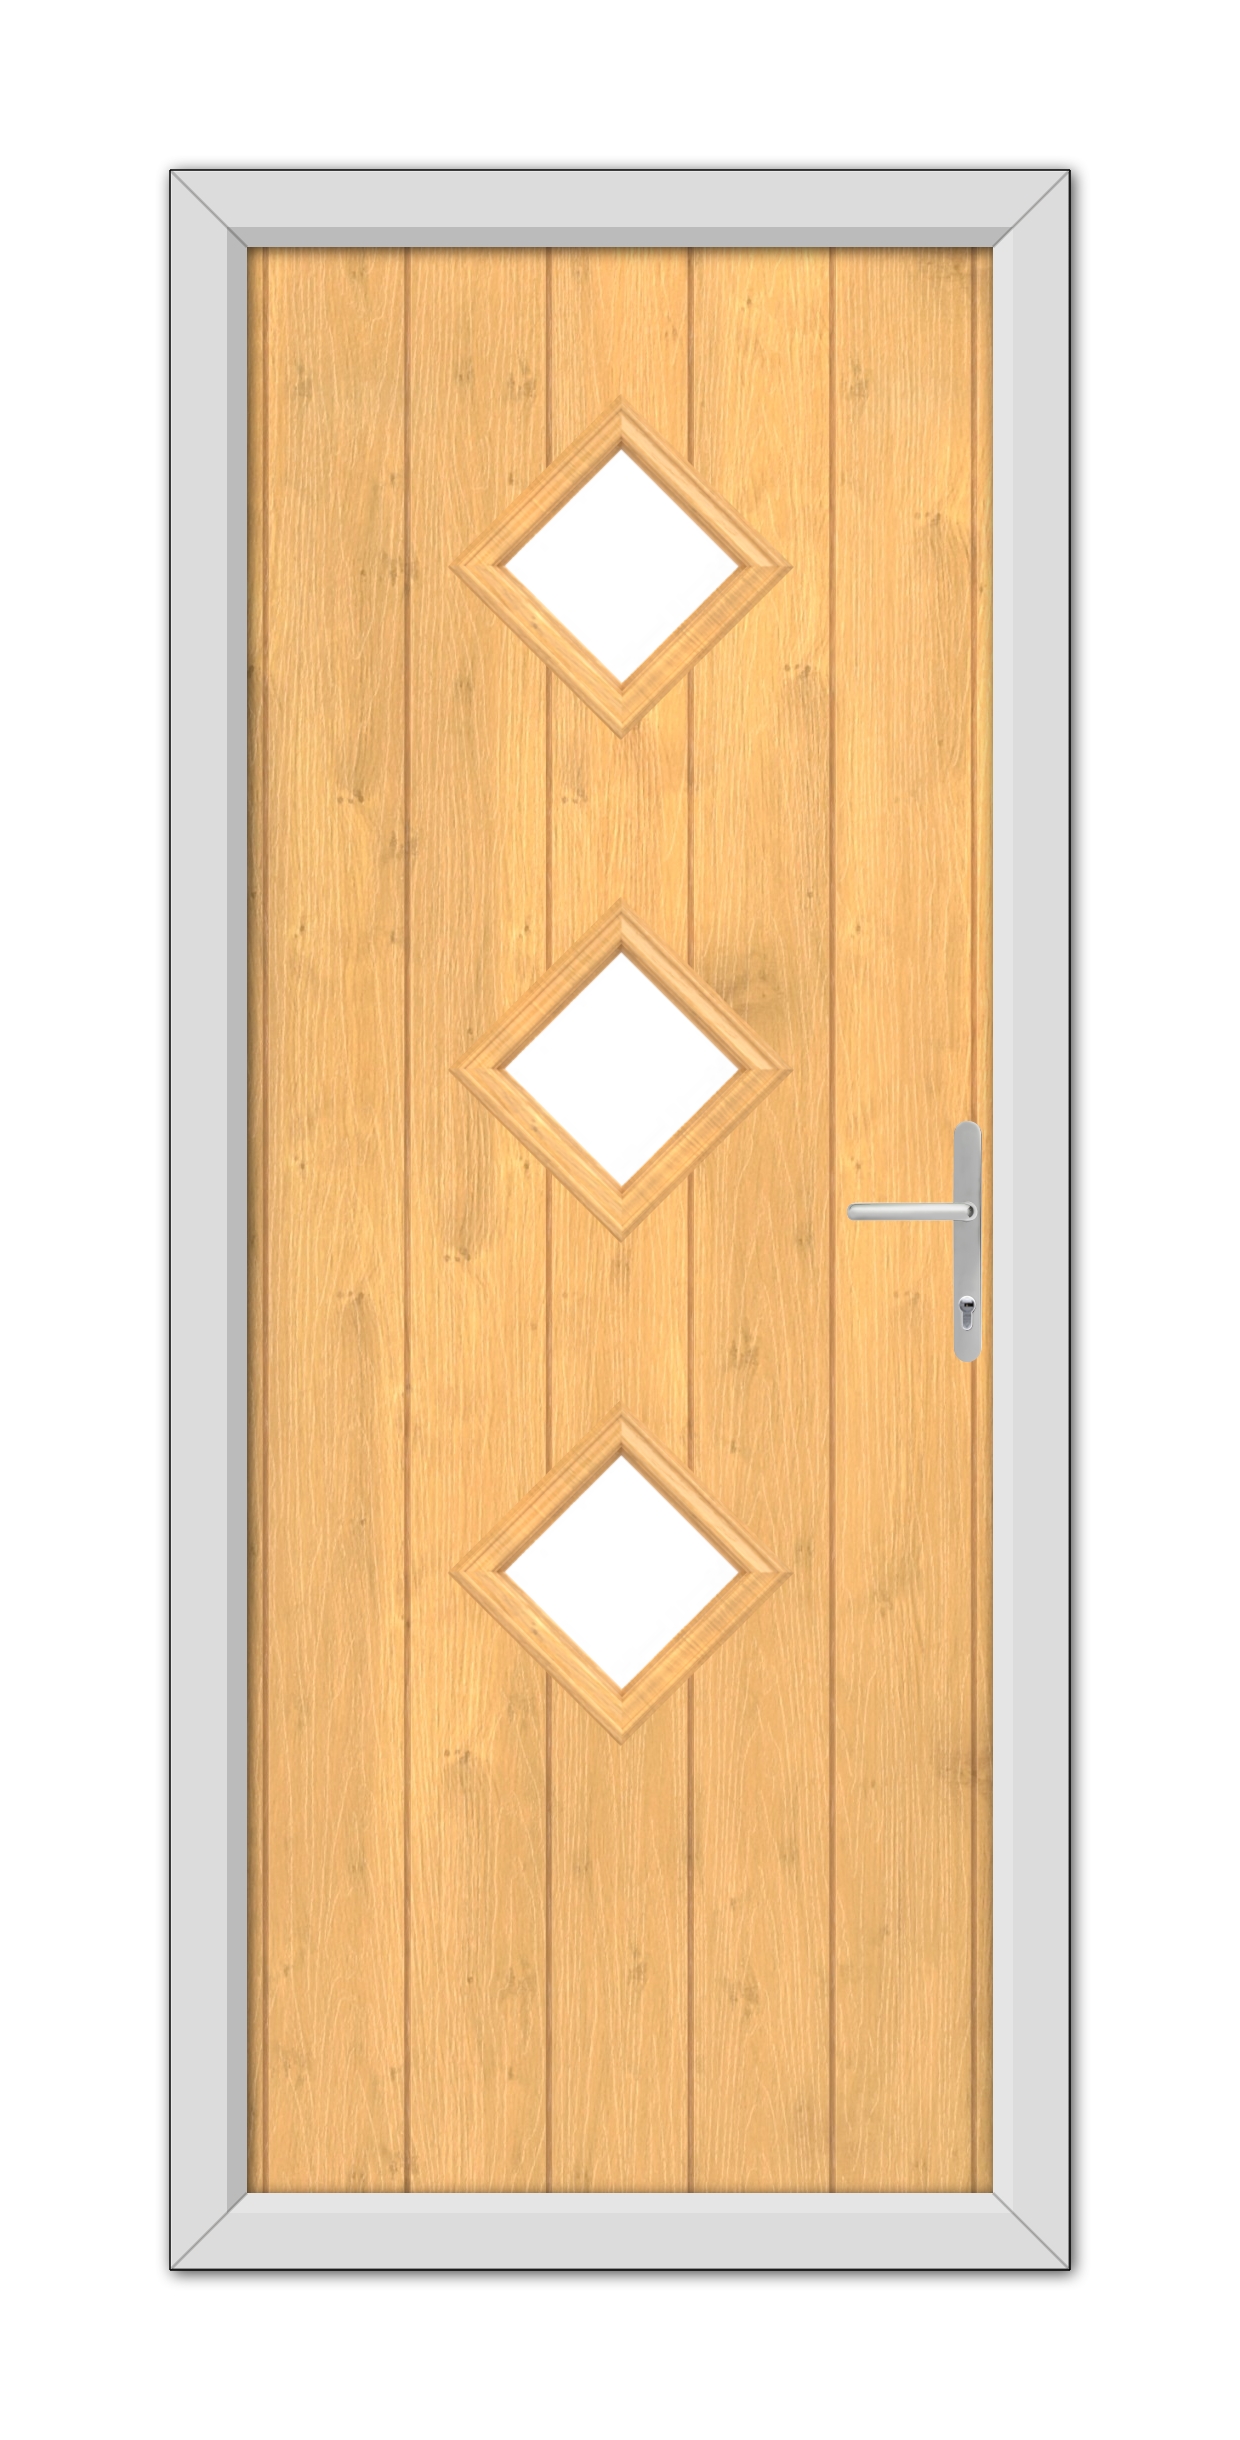 A modern Irish Oak Richmond Composite Door 48mm Timber Core featuring three diamond-shaped glass panels and a silver handle, set within a grey frame.